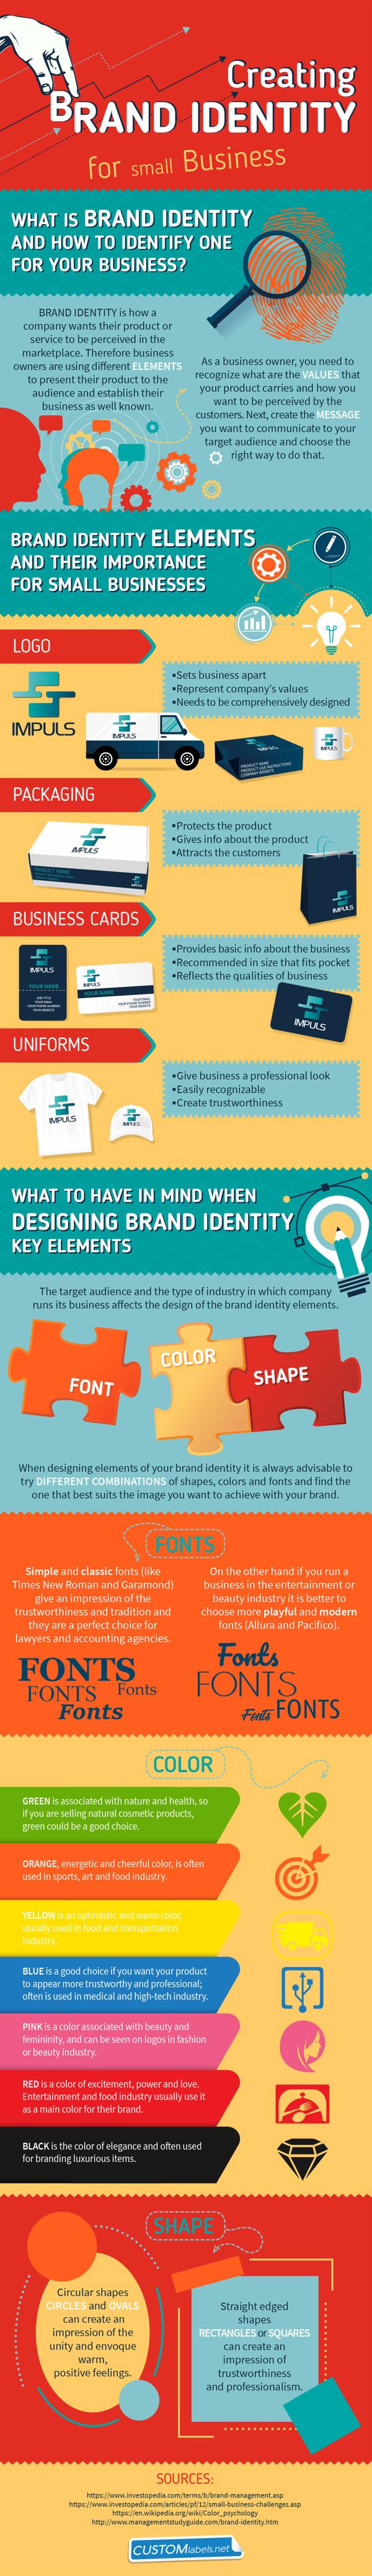 Creating Brand Identity for Small Business [Infographic] 1